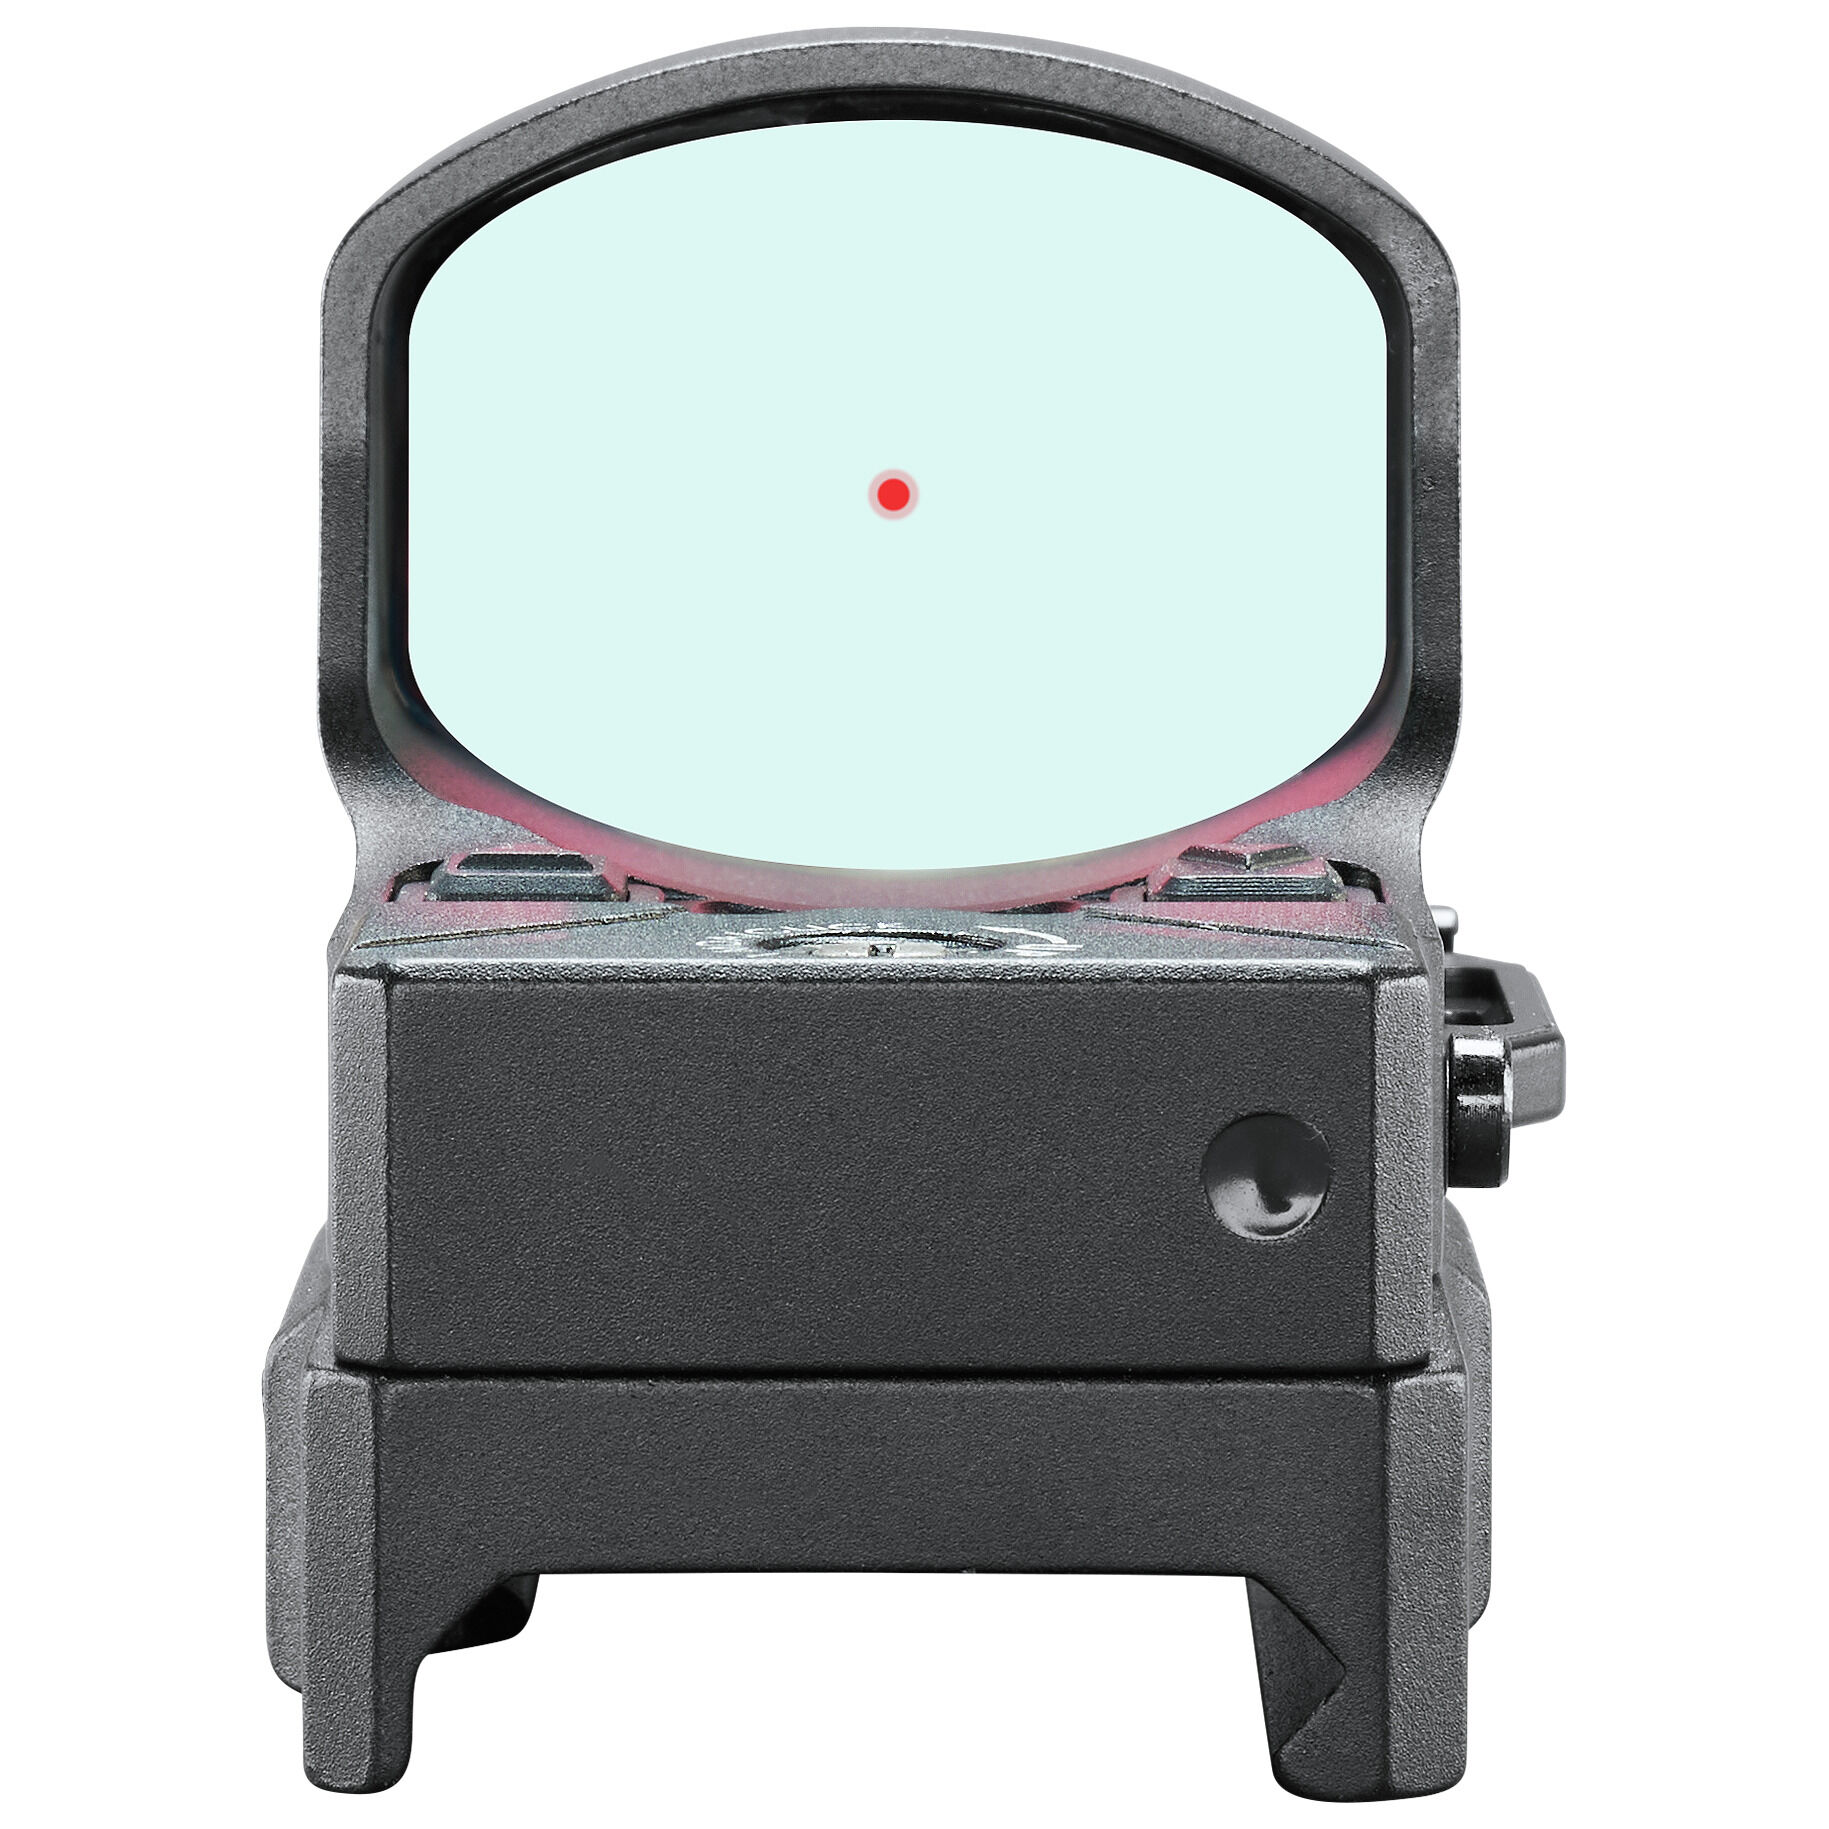 Buy AR Optics Red Dot First Strike 2.0 Reflex Sight and More 